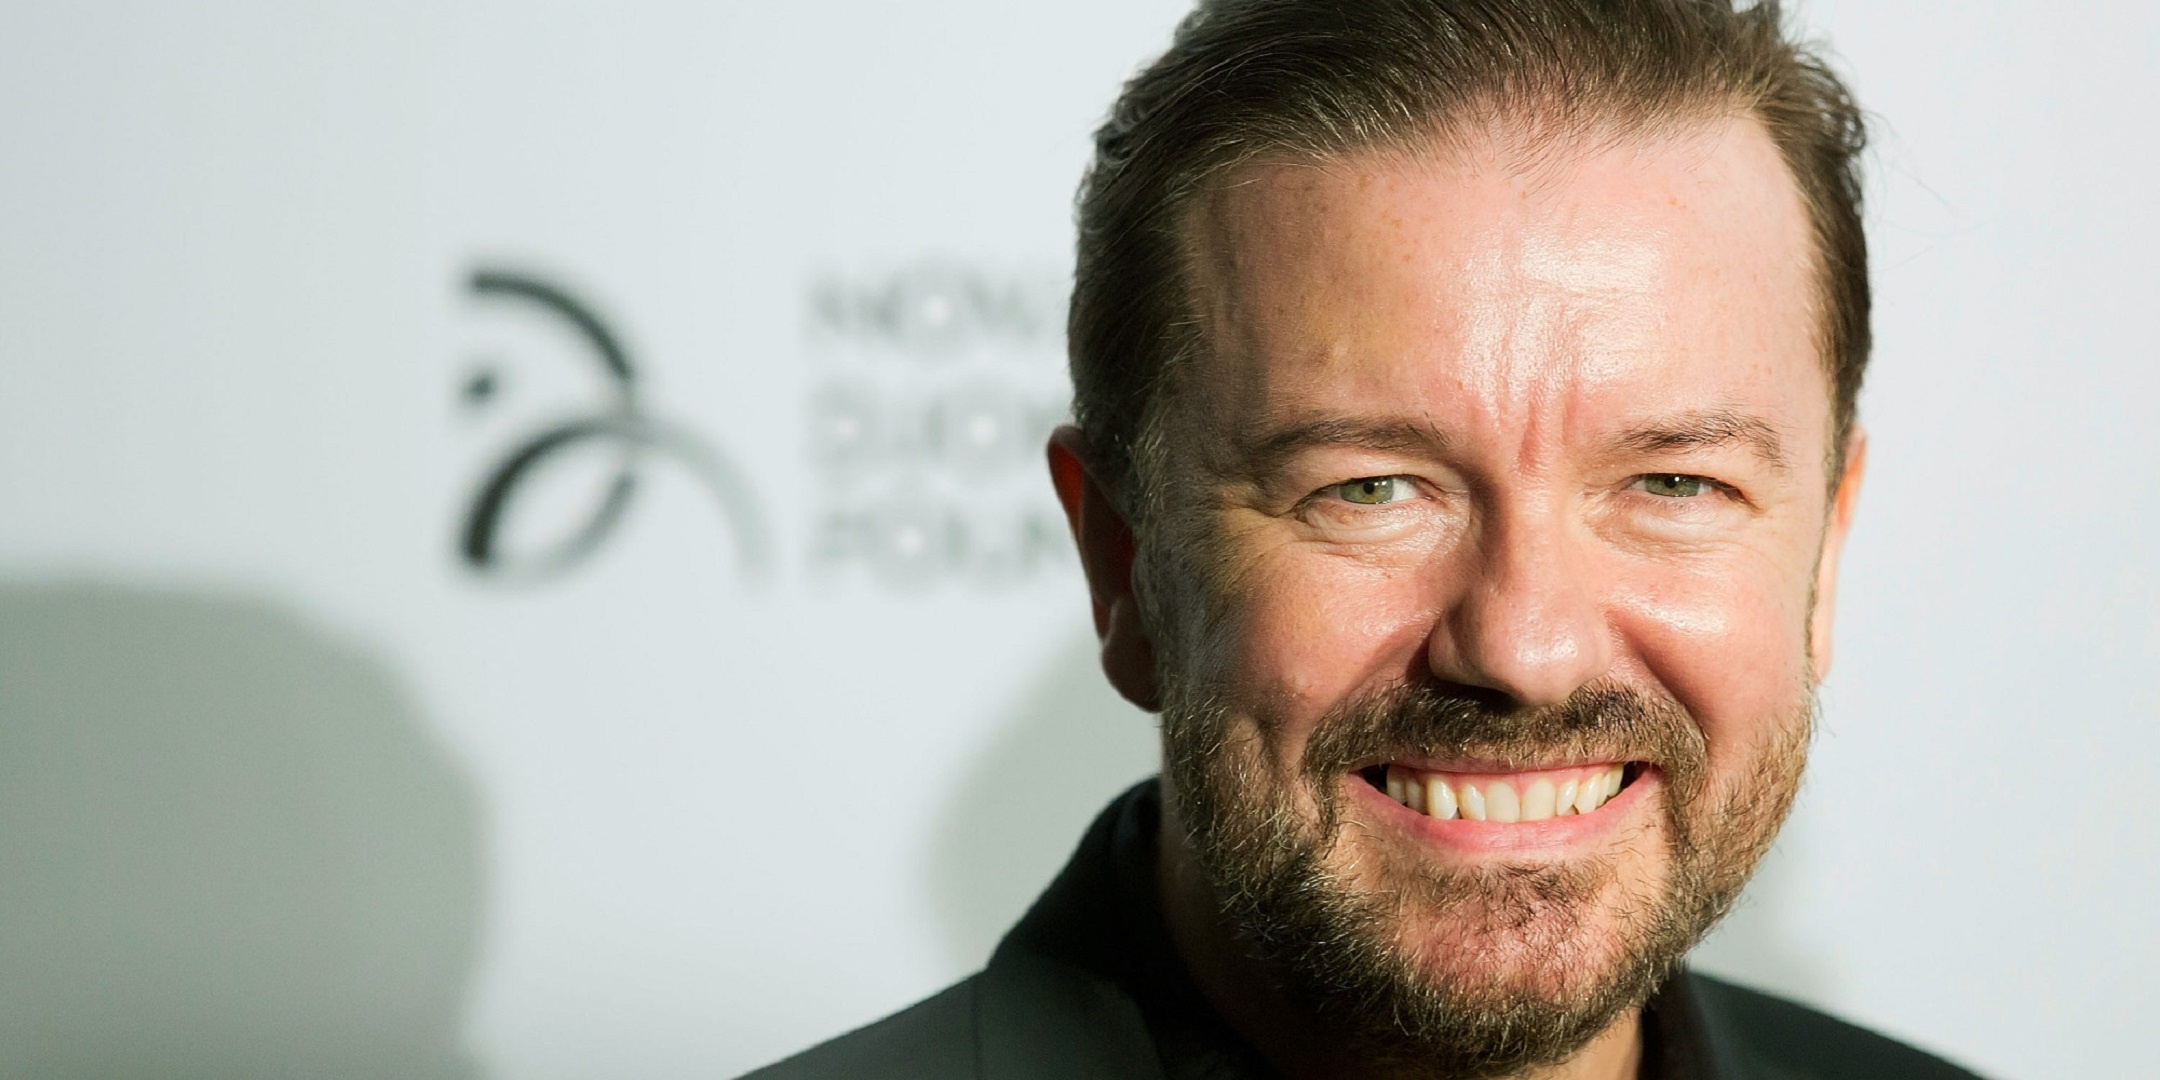 Ricky Gervais, Satirical commentary, Controversial opinions, Unapologetic humor, 2160x1080 Dual Screen Desktop